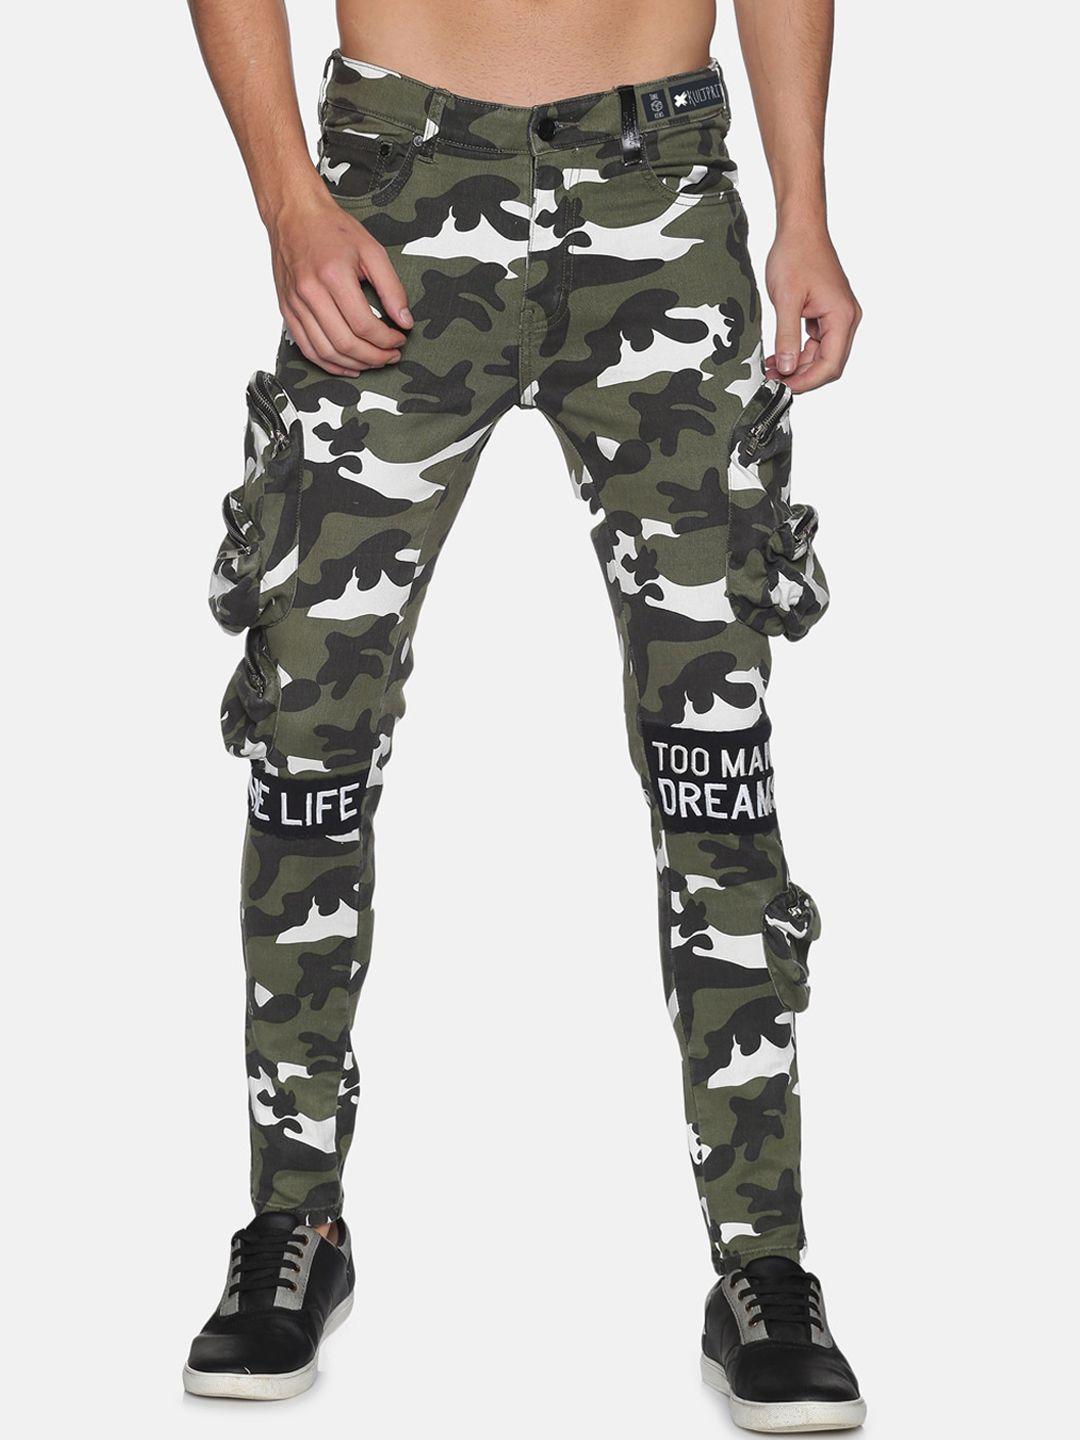 kultprit-men-olive-green-&-white-camouflage-printed-slim-fit-cotton-cargos-trousers